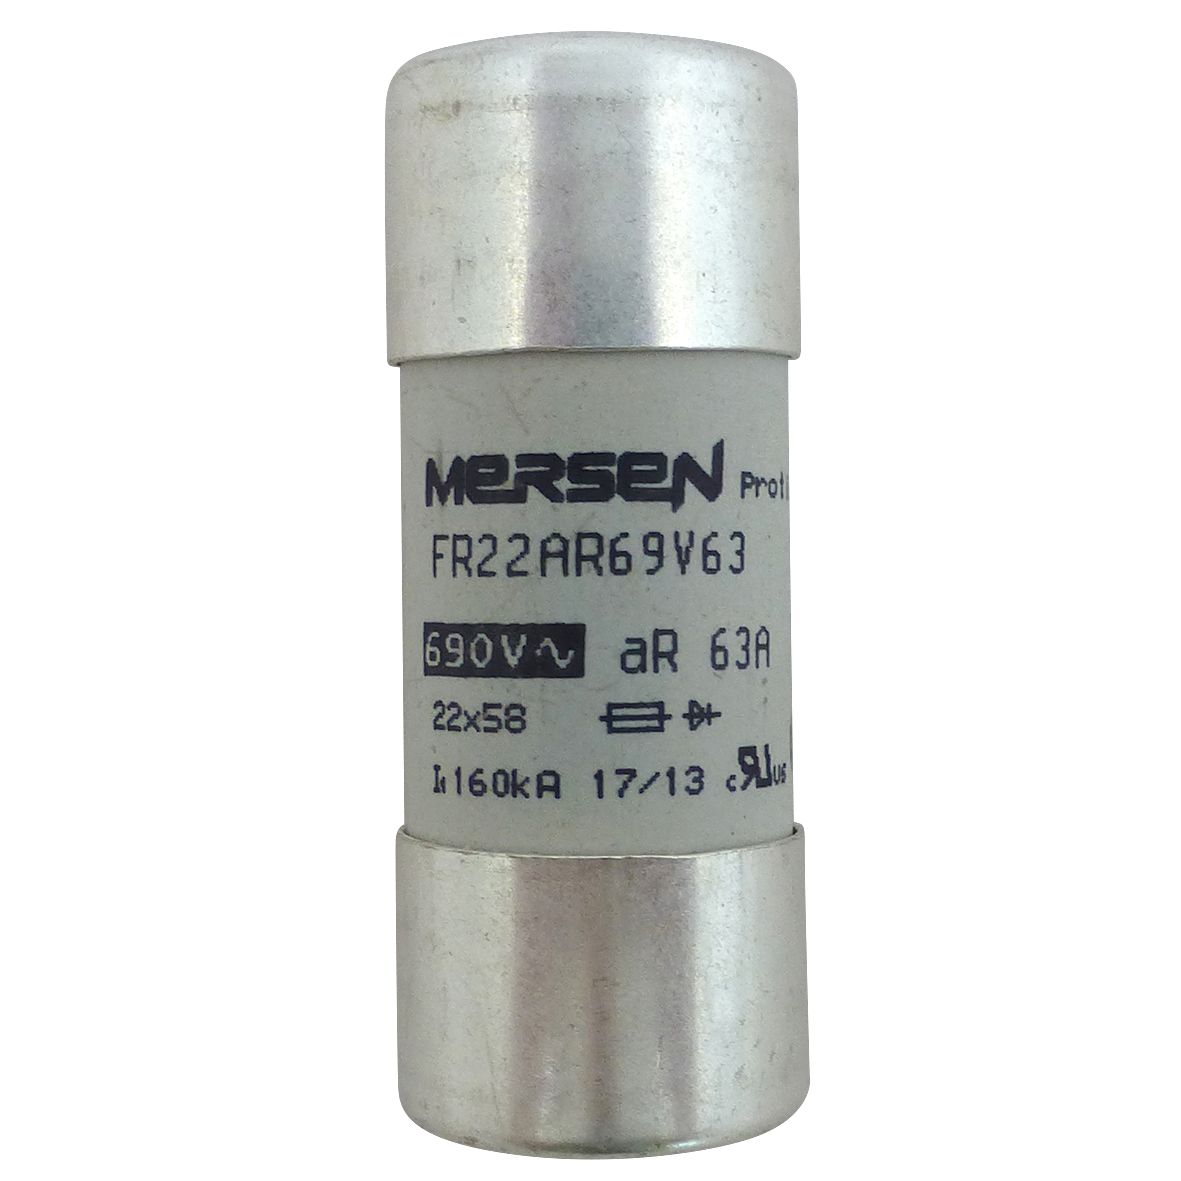 C1027320 - Cylindrical fuse-link aR 690VAC 22x58, 63A, without indicator